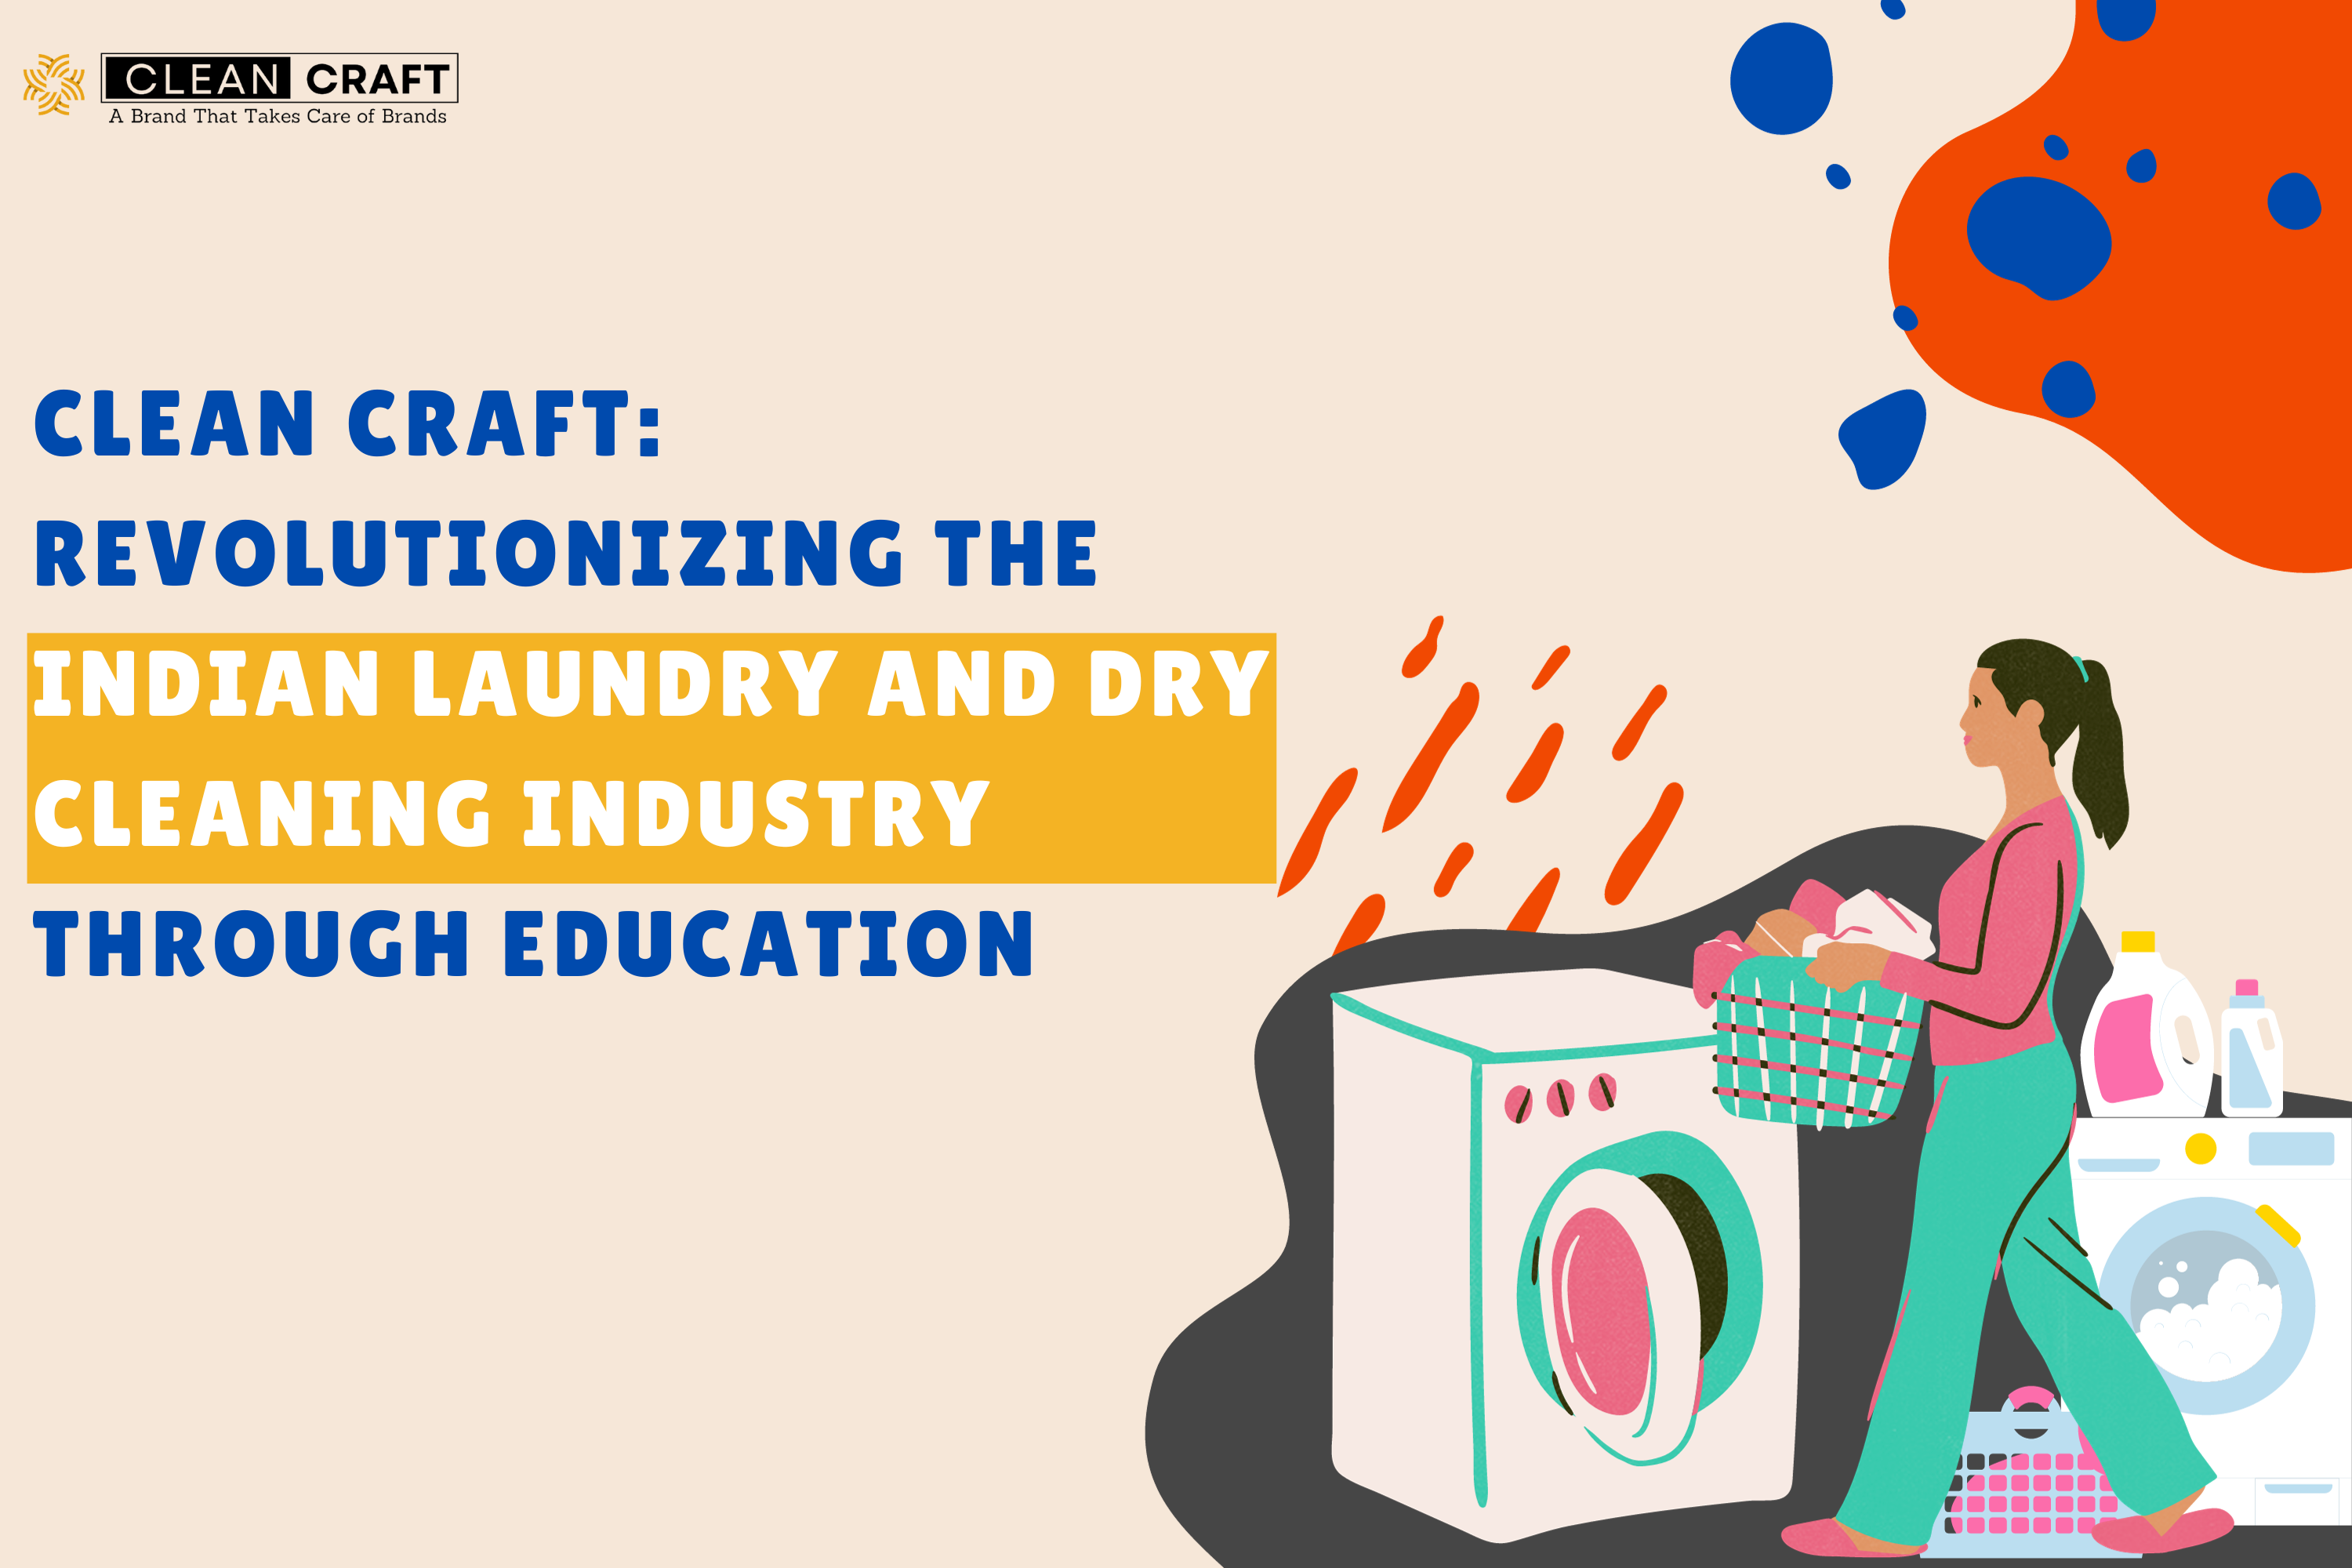 Clean Craft: Revolutionizing the Indian Laundry and Dry Cleaning Industry Through Education